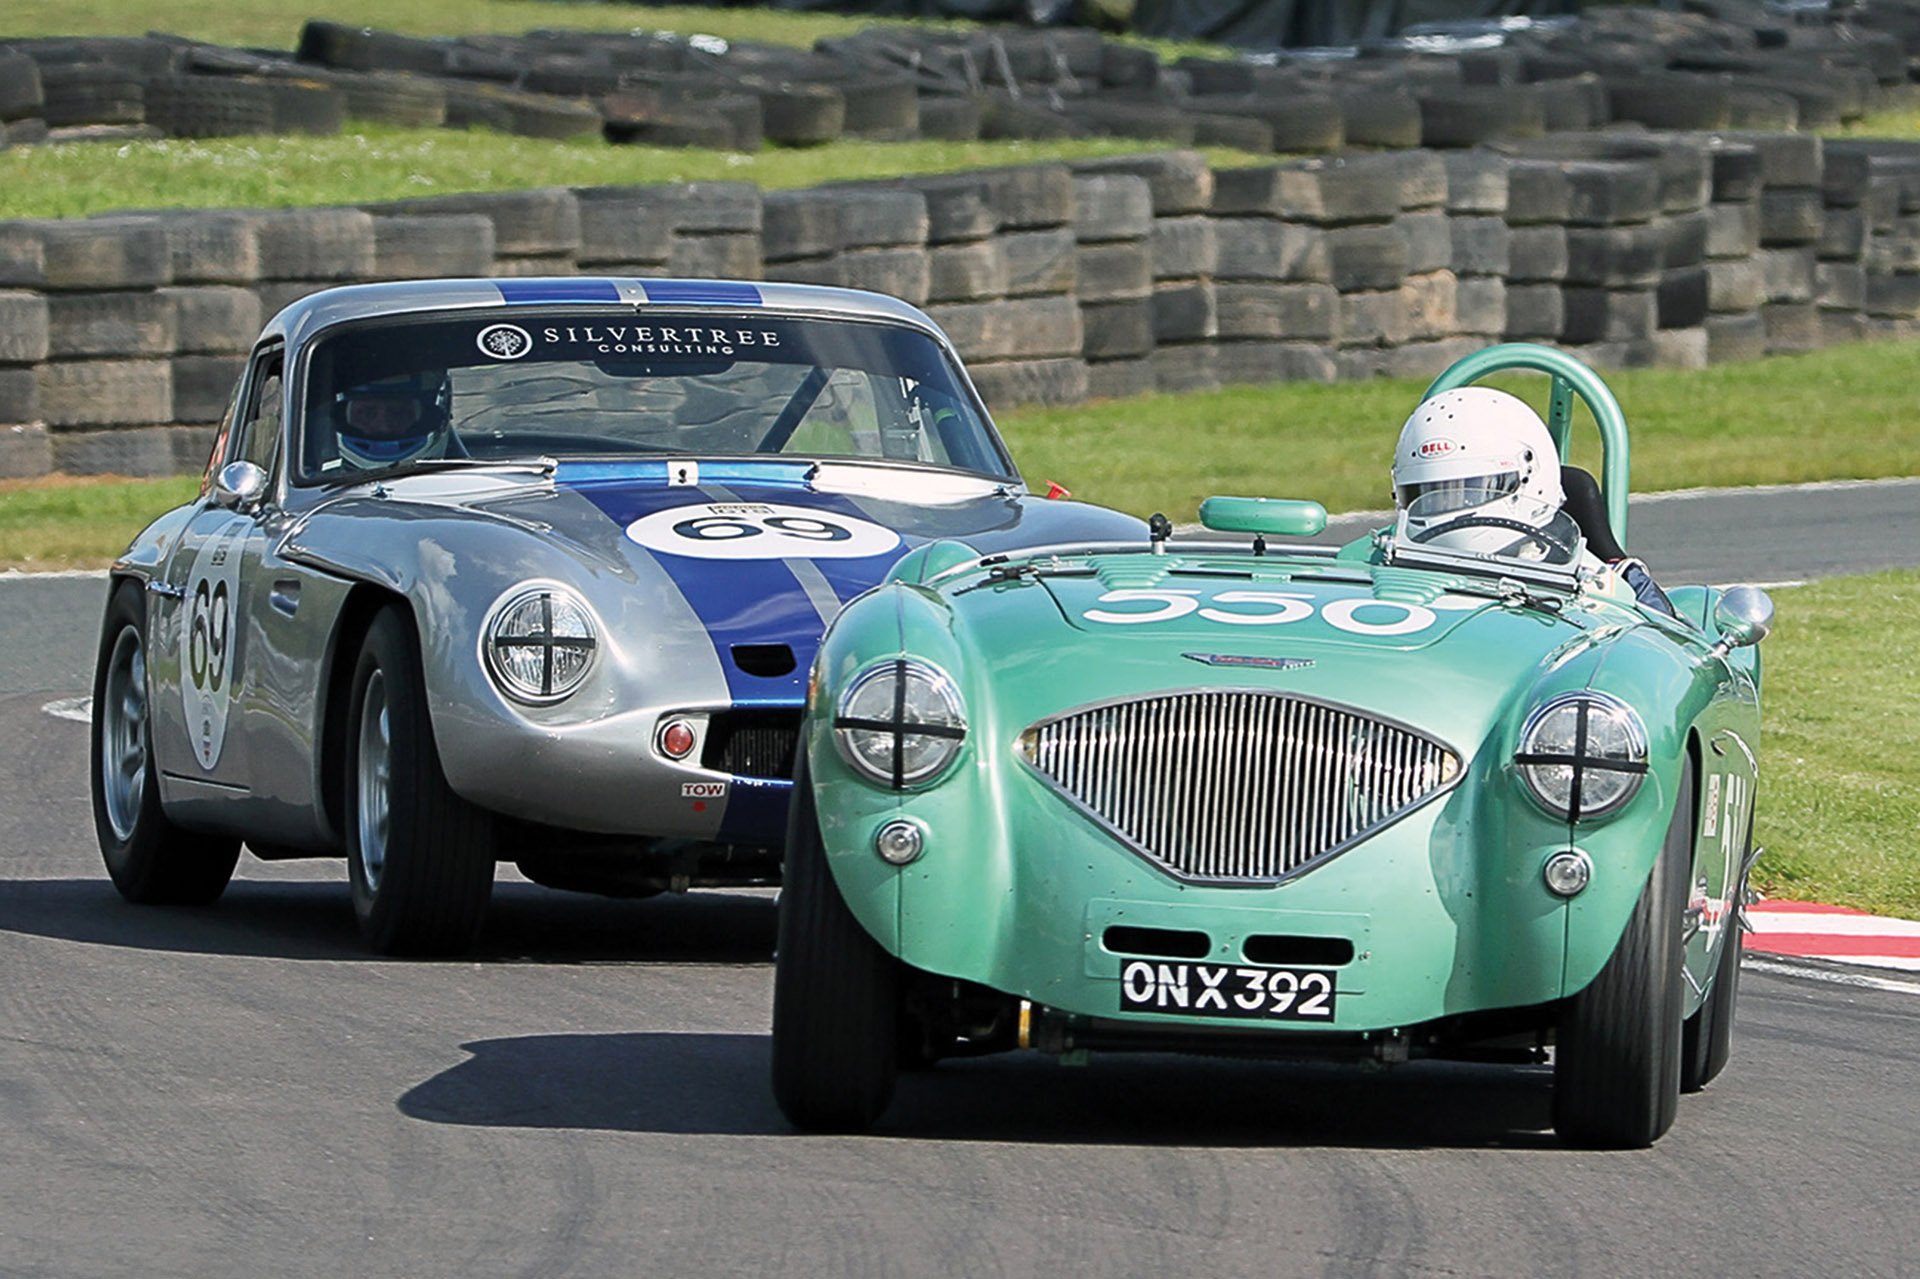 Equipe Classic Car Racing features historic sports cars raced in the spirit of Gentlemen Drivers